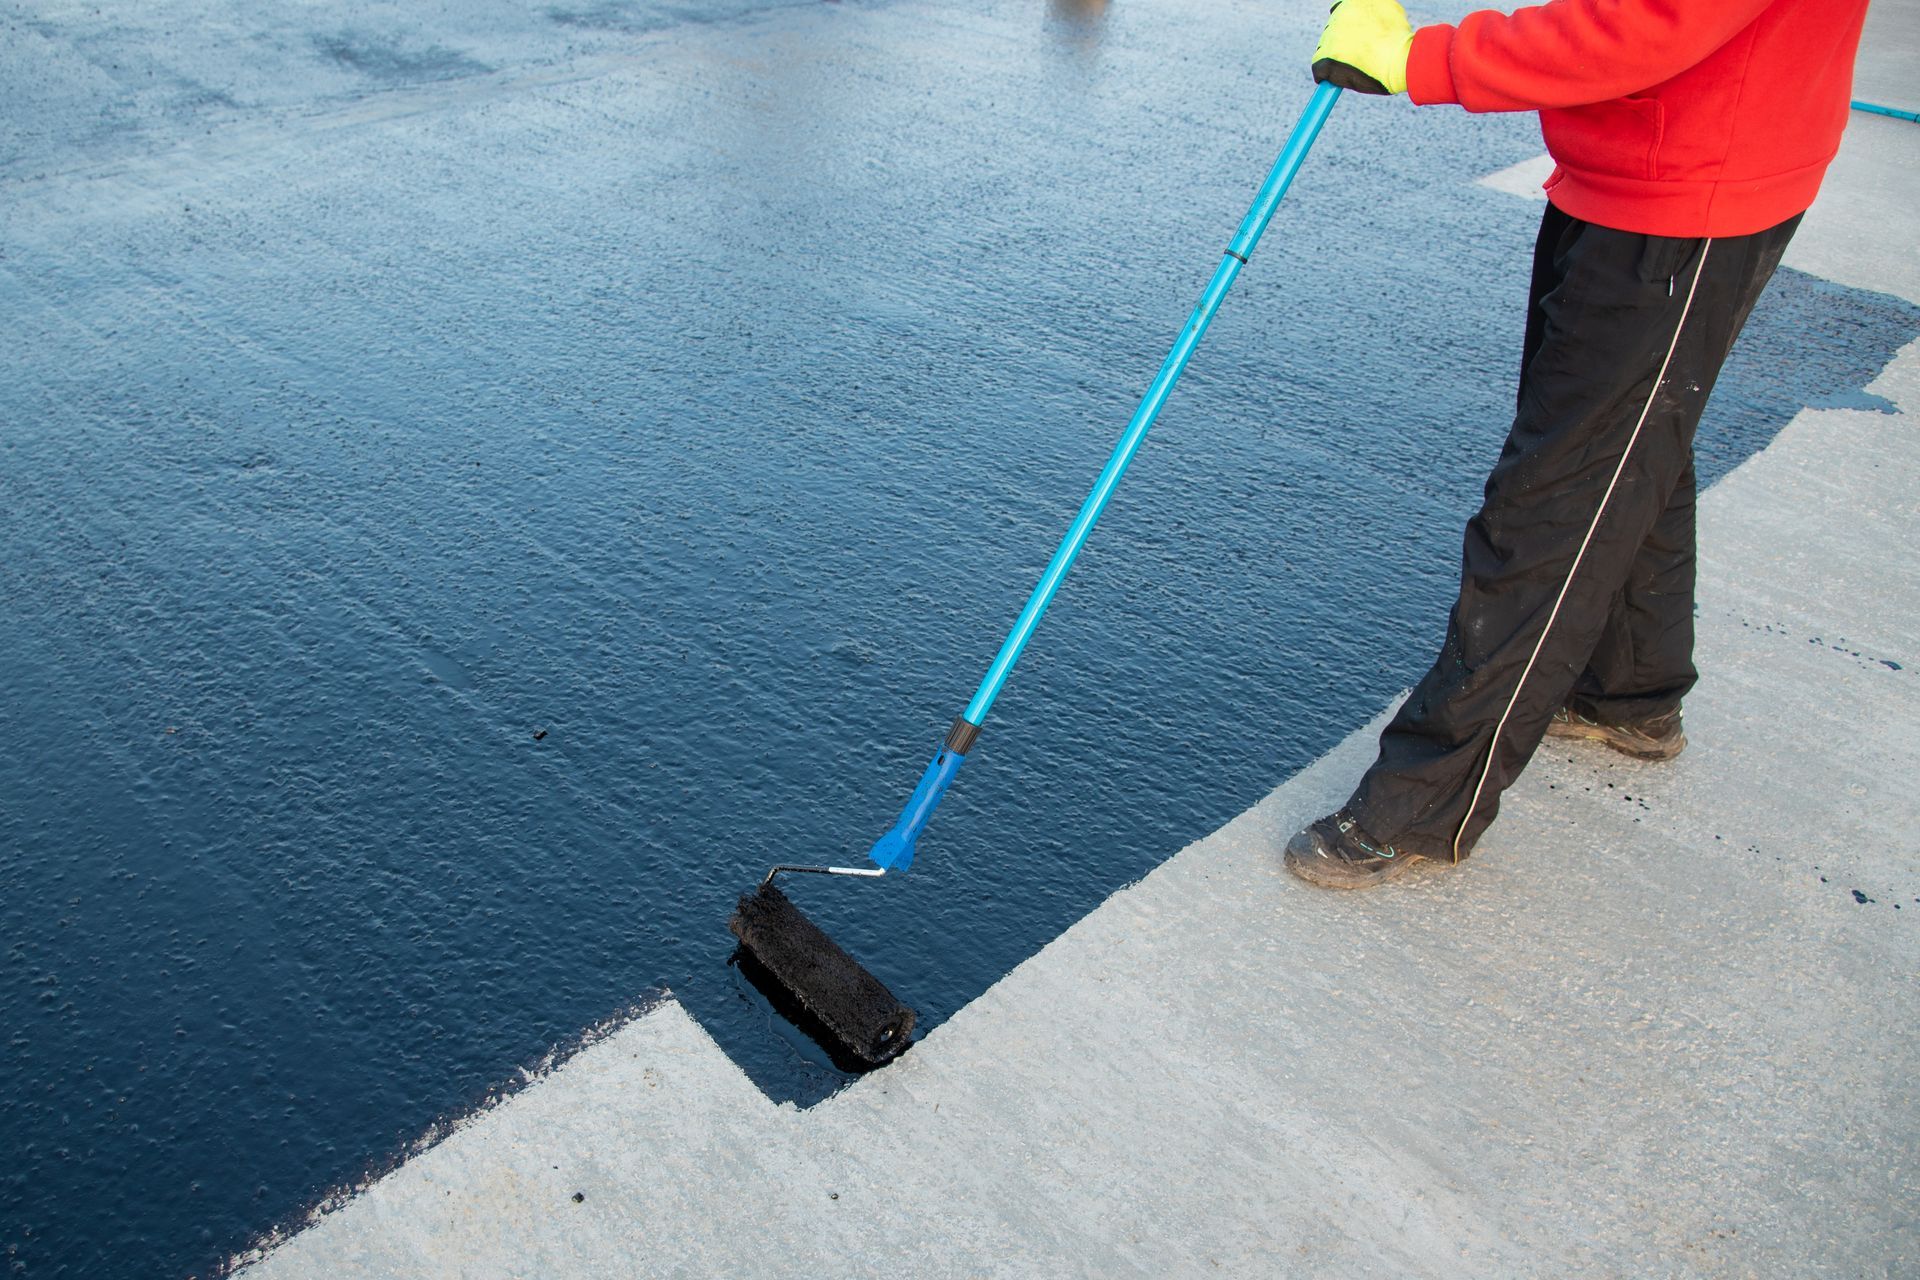 A person is painting a concrete surface with a roller.